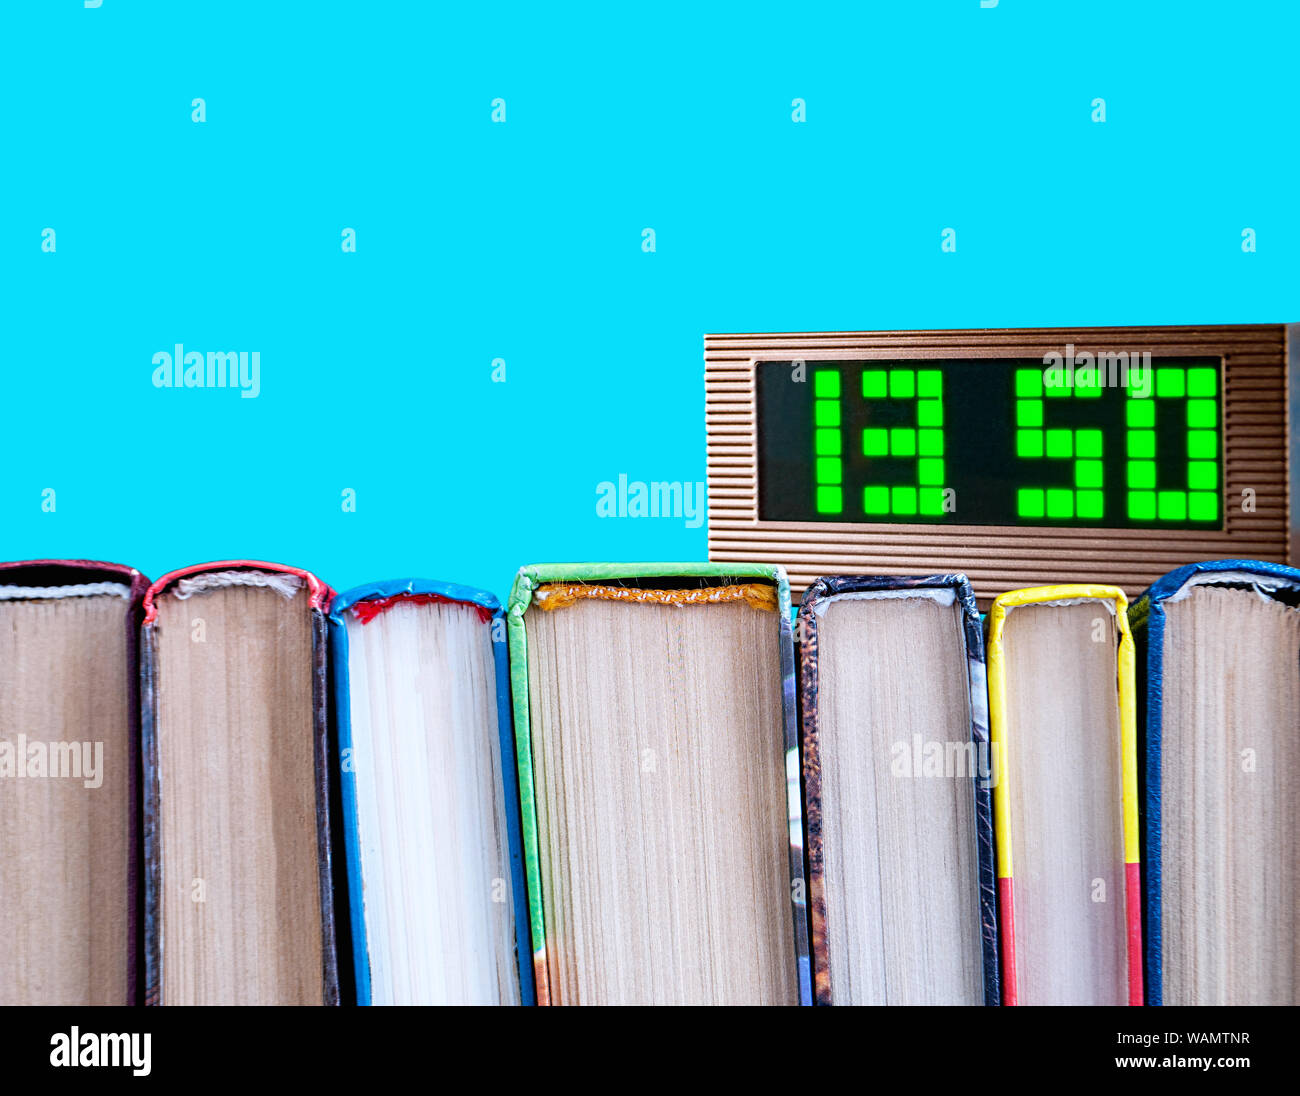 row of books and electronic clock on a blue background Stock Photo